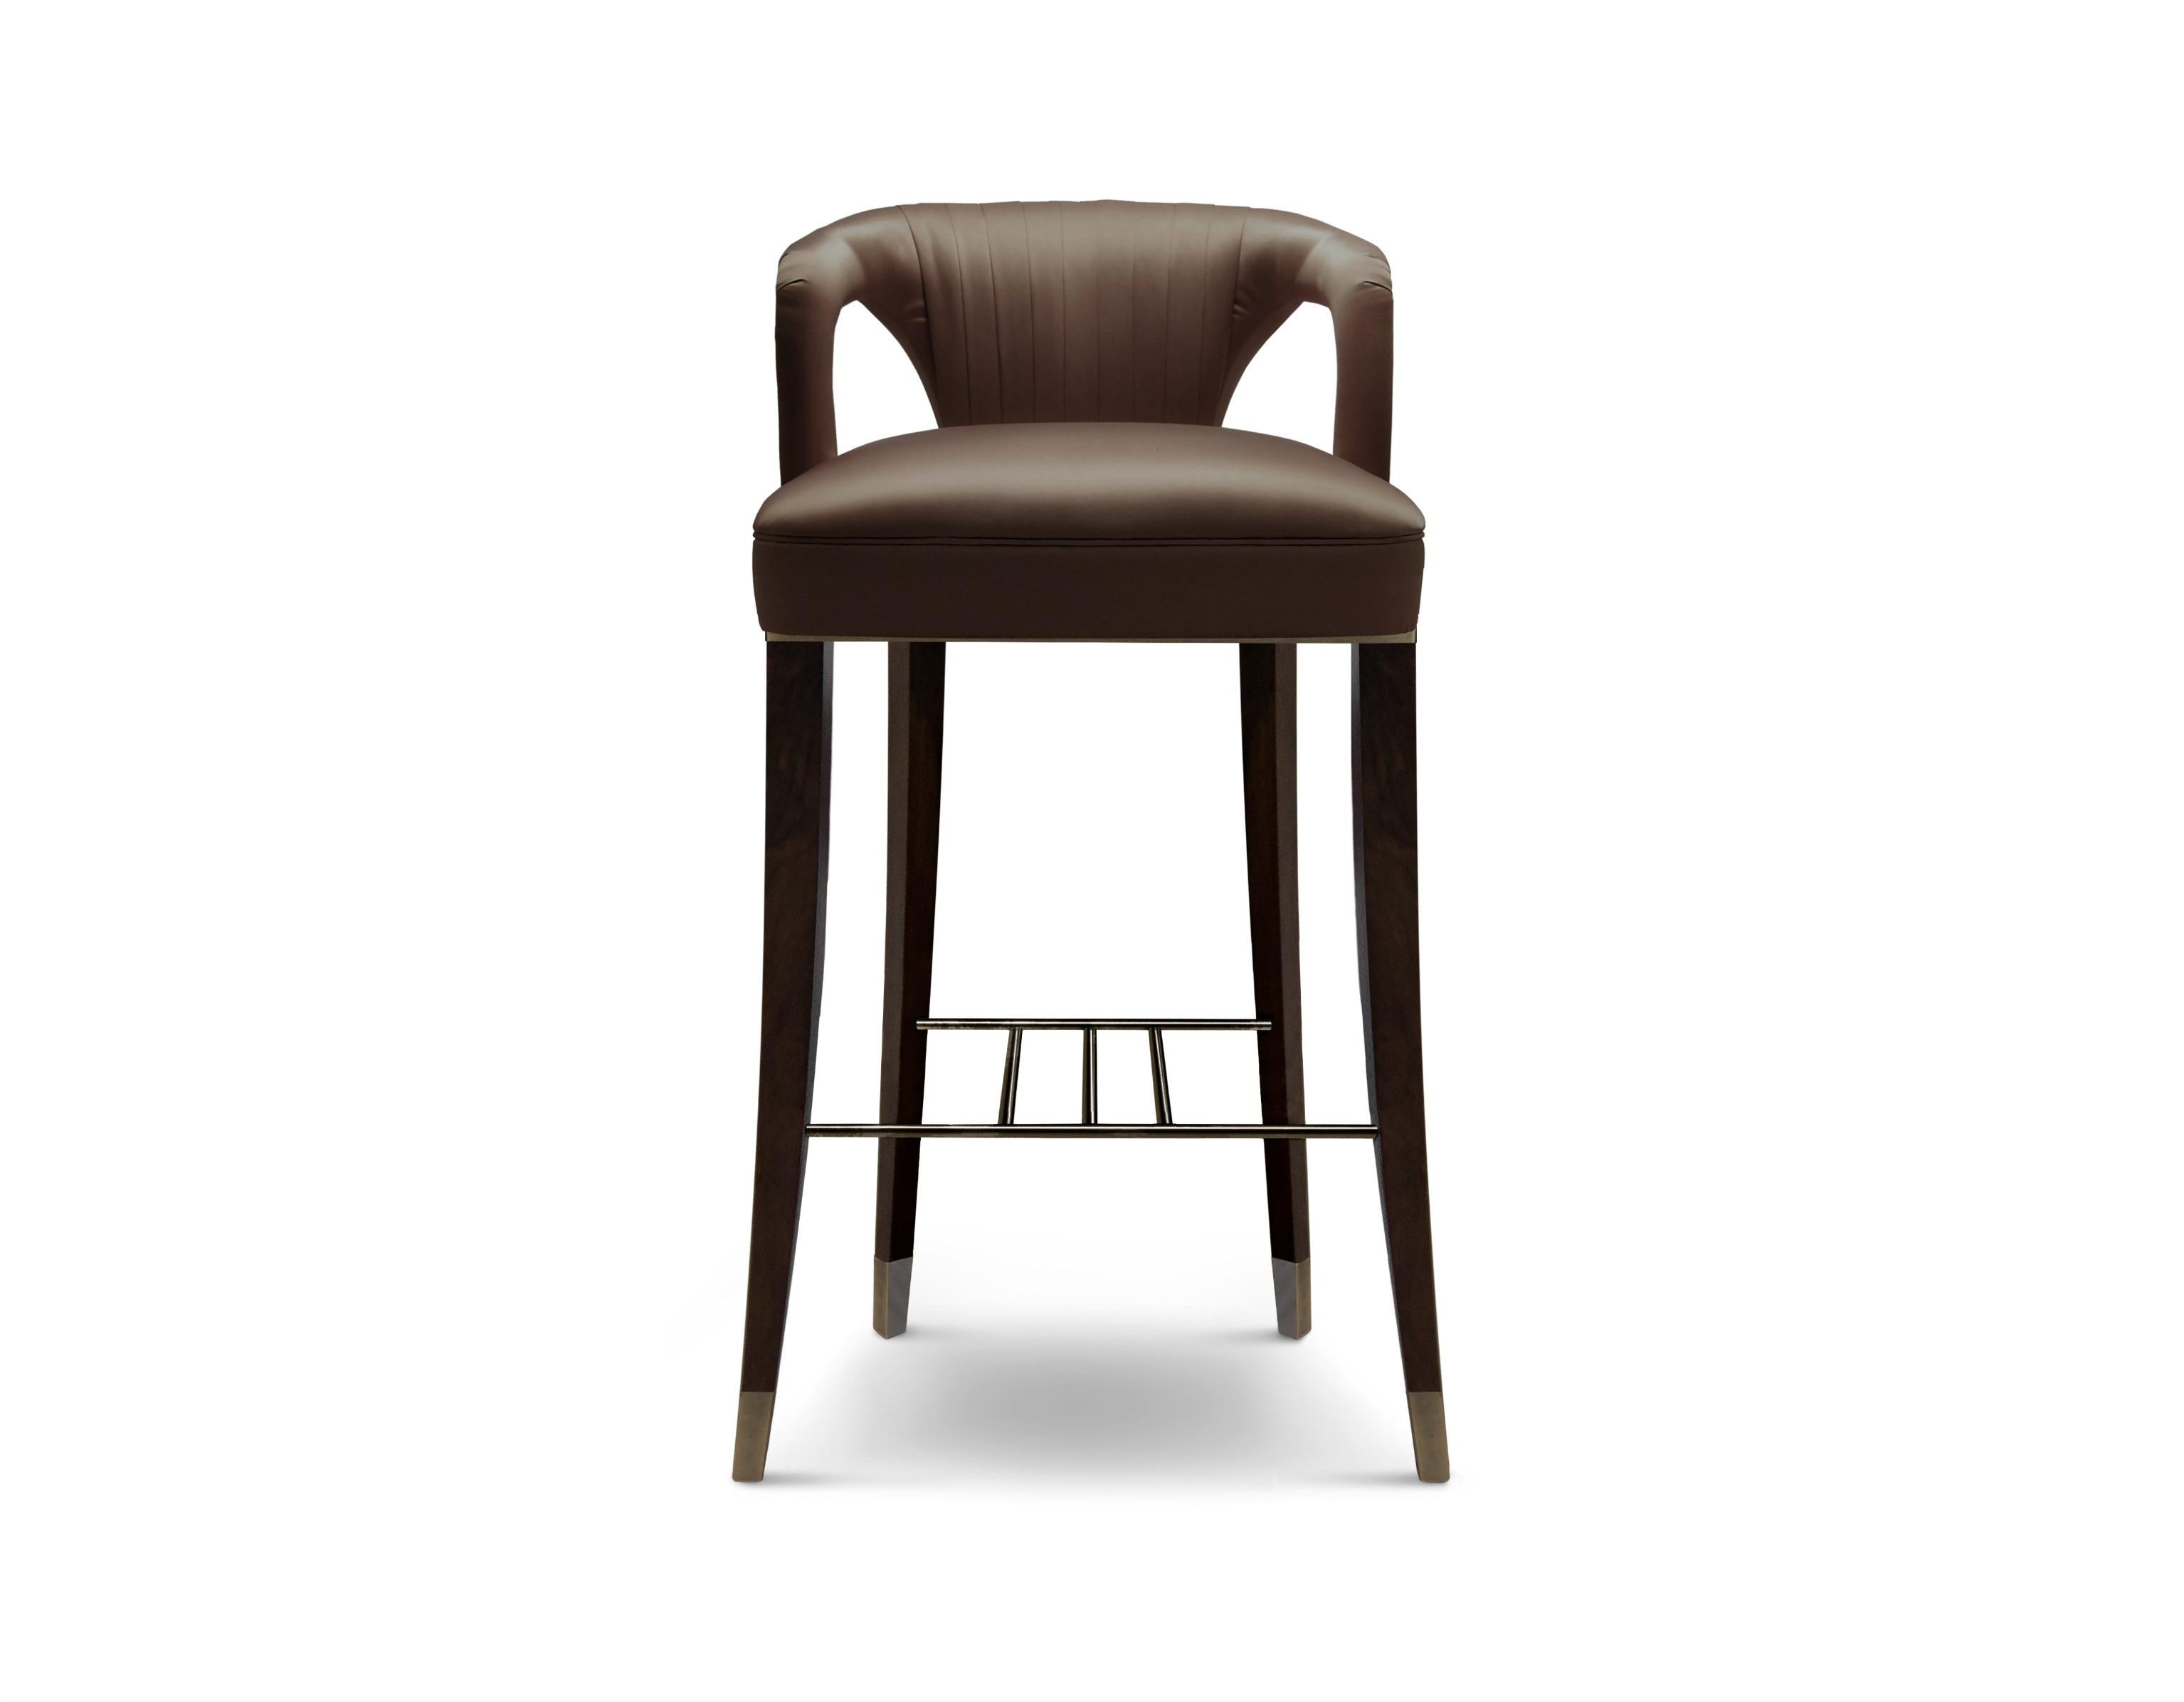 A semi-desert area in South Africa was the perfect environment to be the inspiration behind KAROO Counter Stool. With a unique chair design, fully upholstered in cotton satin and legs in ash with walnut stain matte varnish, this stool with back is